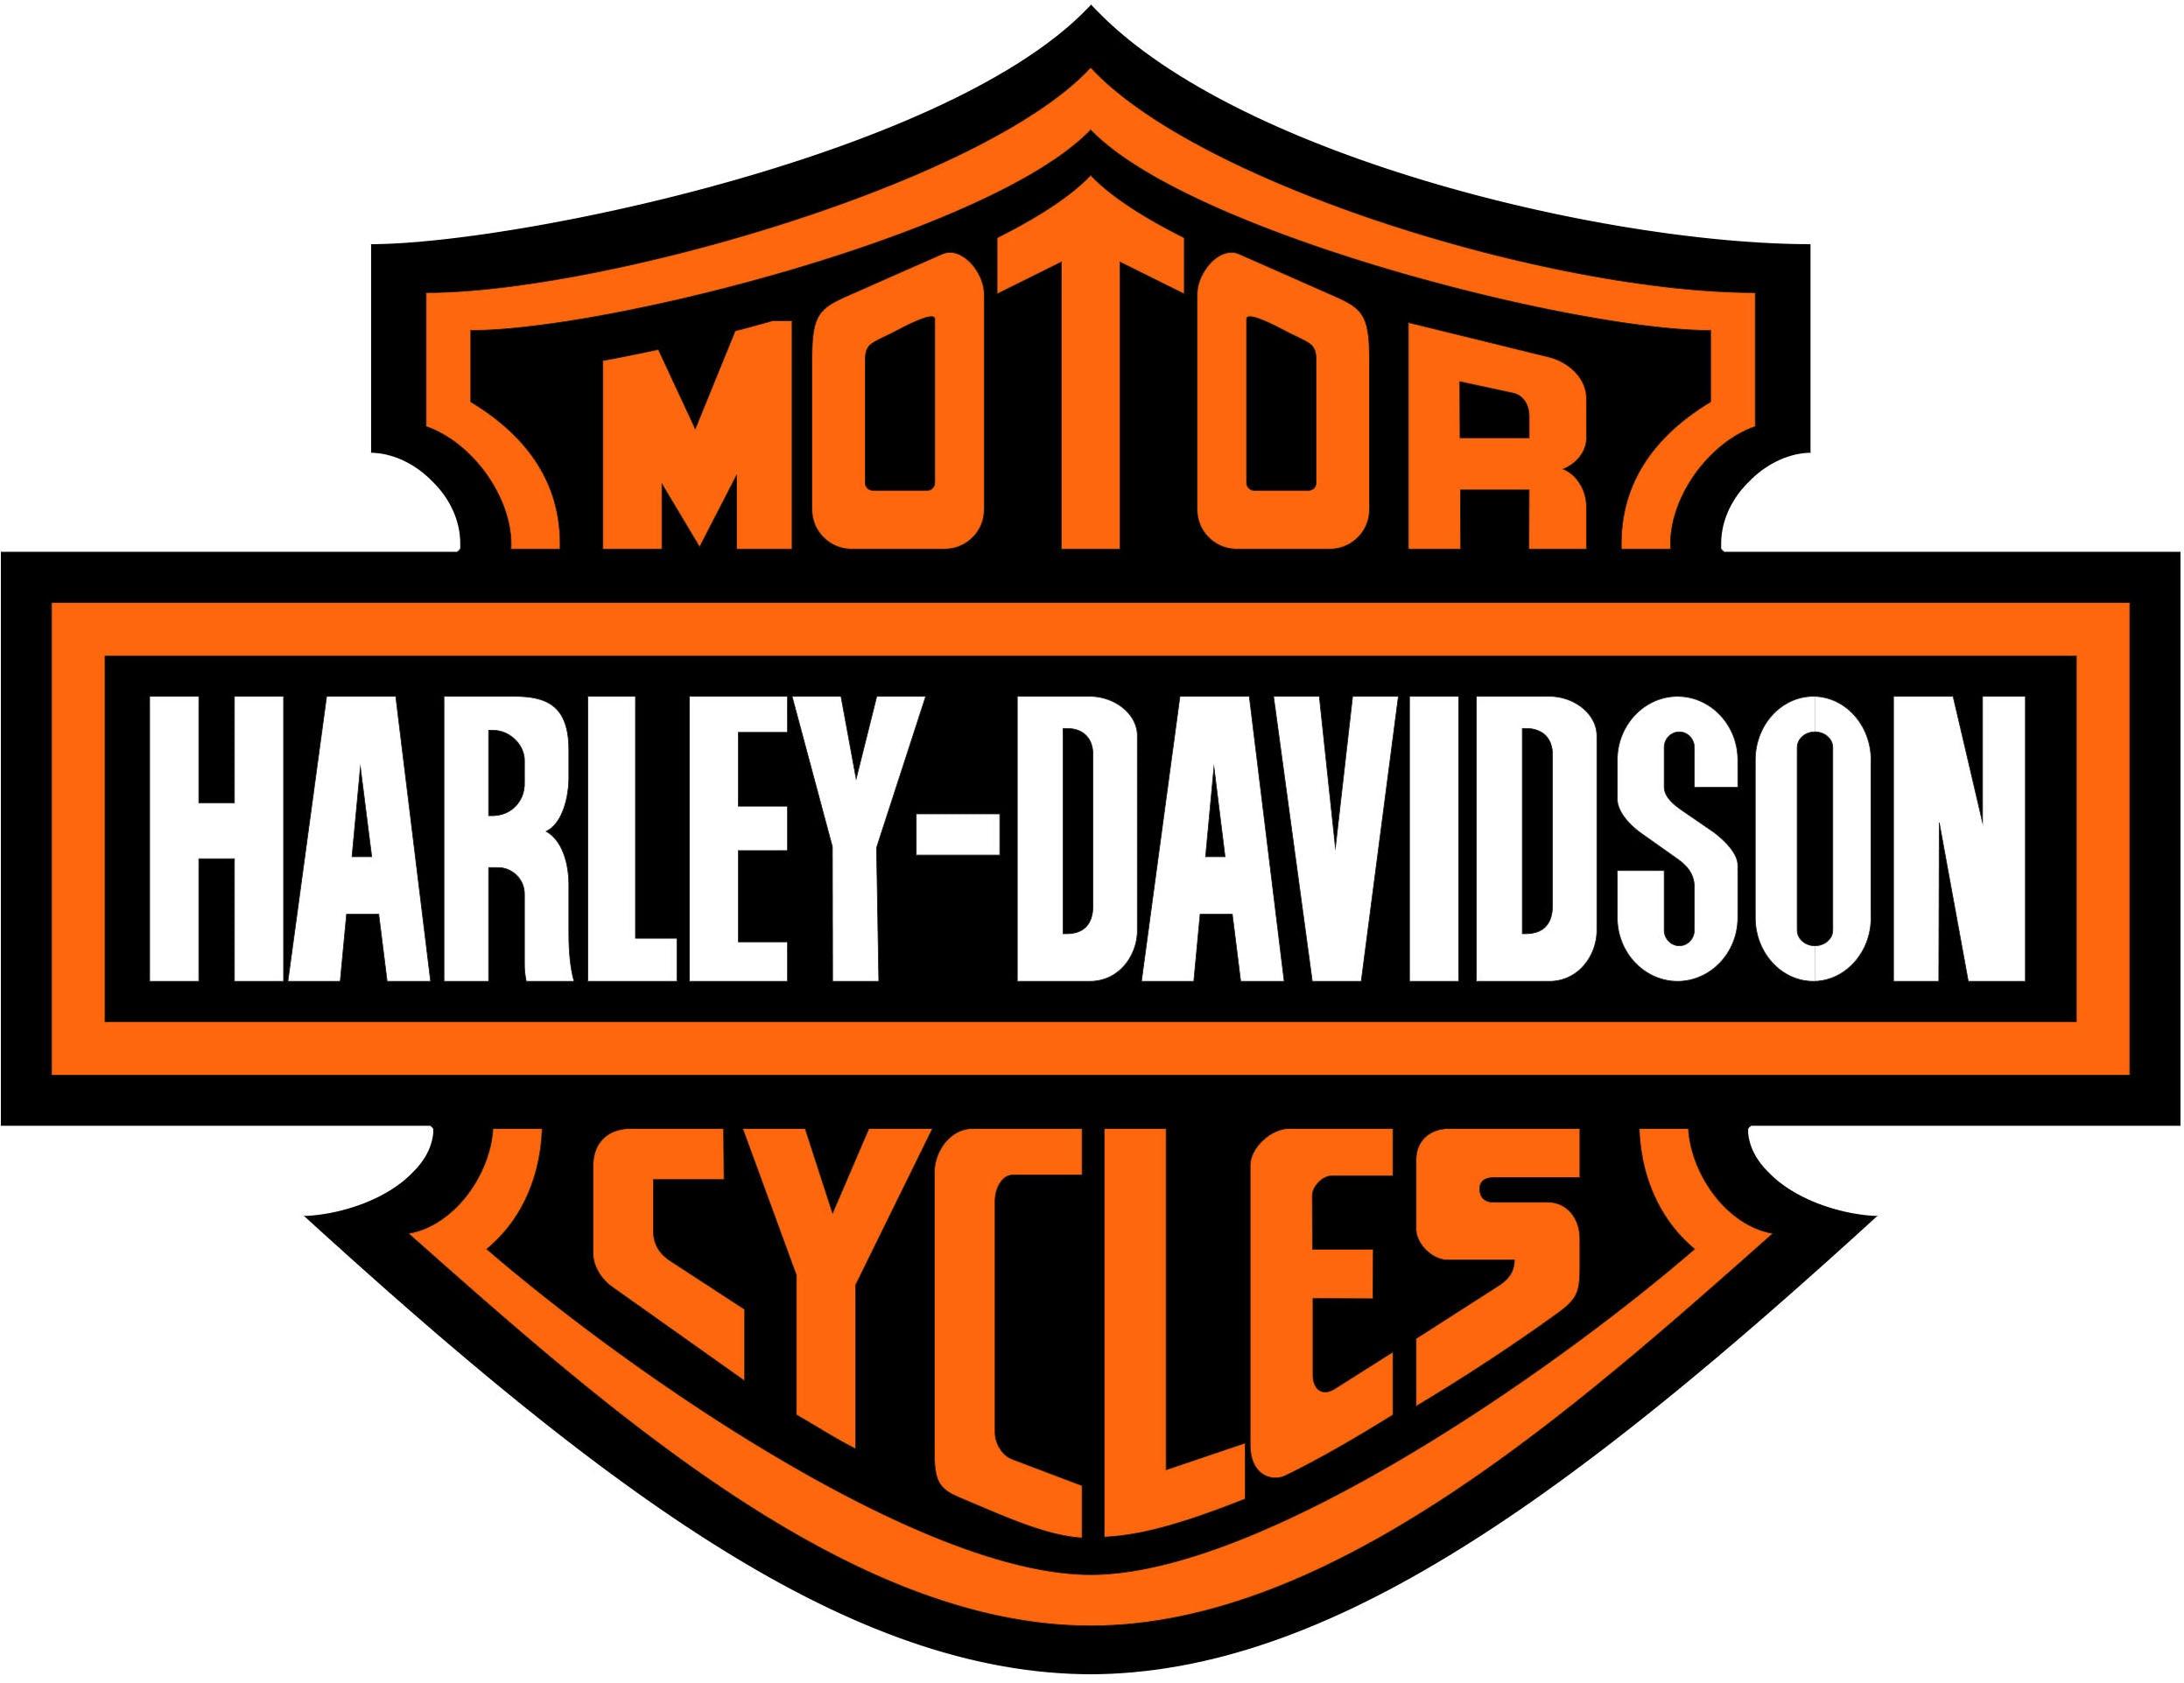 CoolWalls.ca Sports 70" x 26" Harley Davidson Motor Cycles, Peel and Stick wall Decal. Peel-N-Stick, Removable